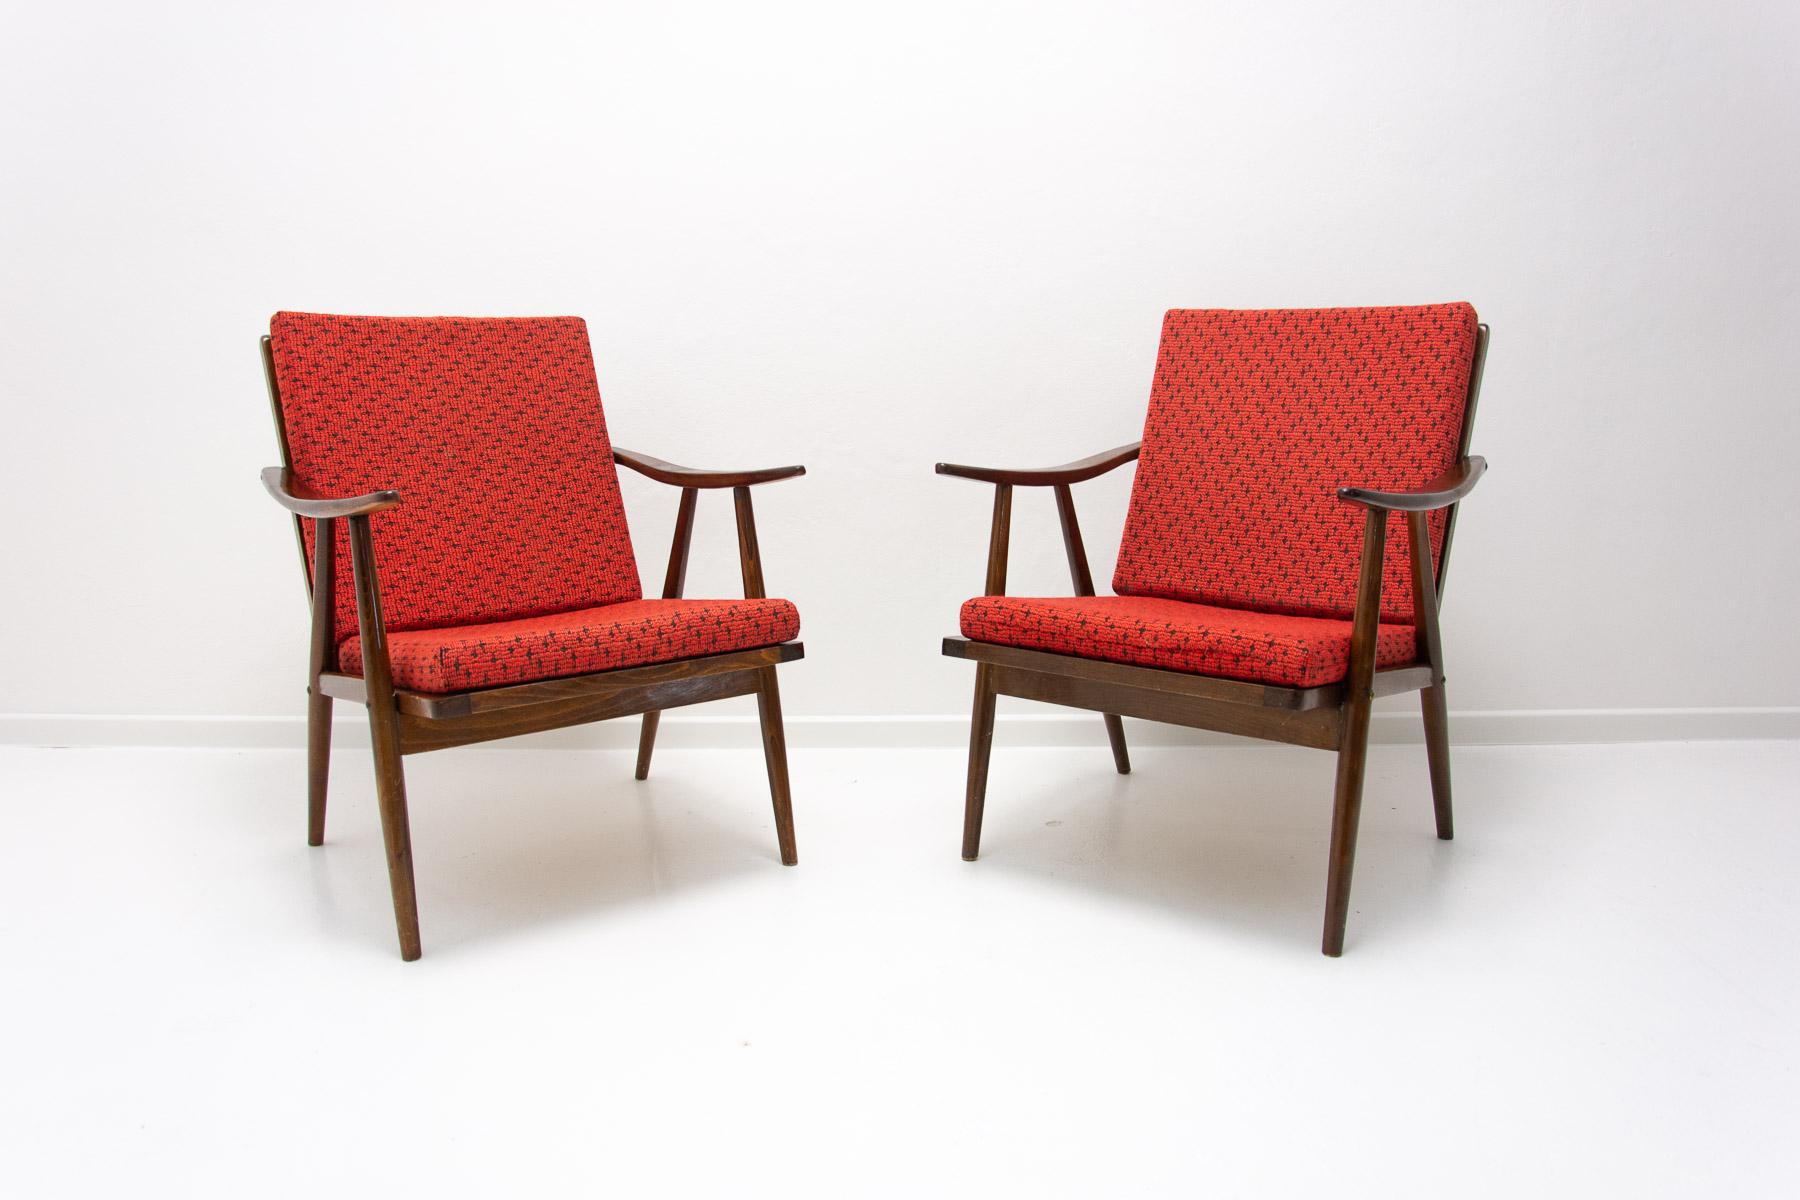 These armchairs were designed by Jaroslav Šmídek for TON company and made in the former Czechoslovakia in the 1970s. They are made of beechwood.

The chairs are stable and comfortable, the springs under the seat are firm and stable.

The chairs